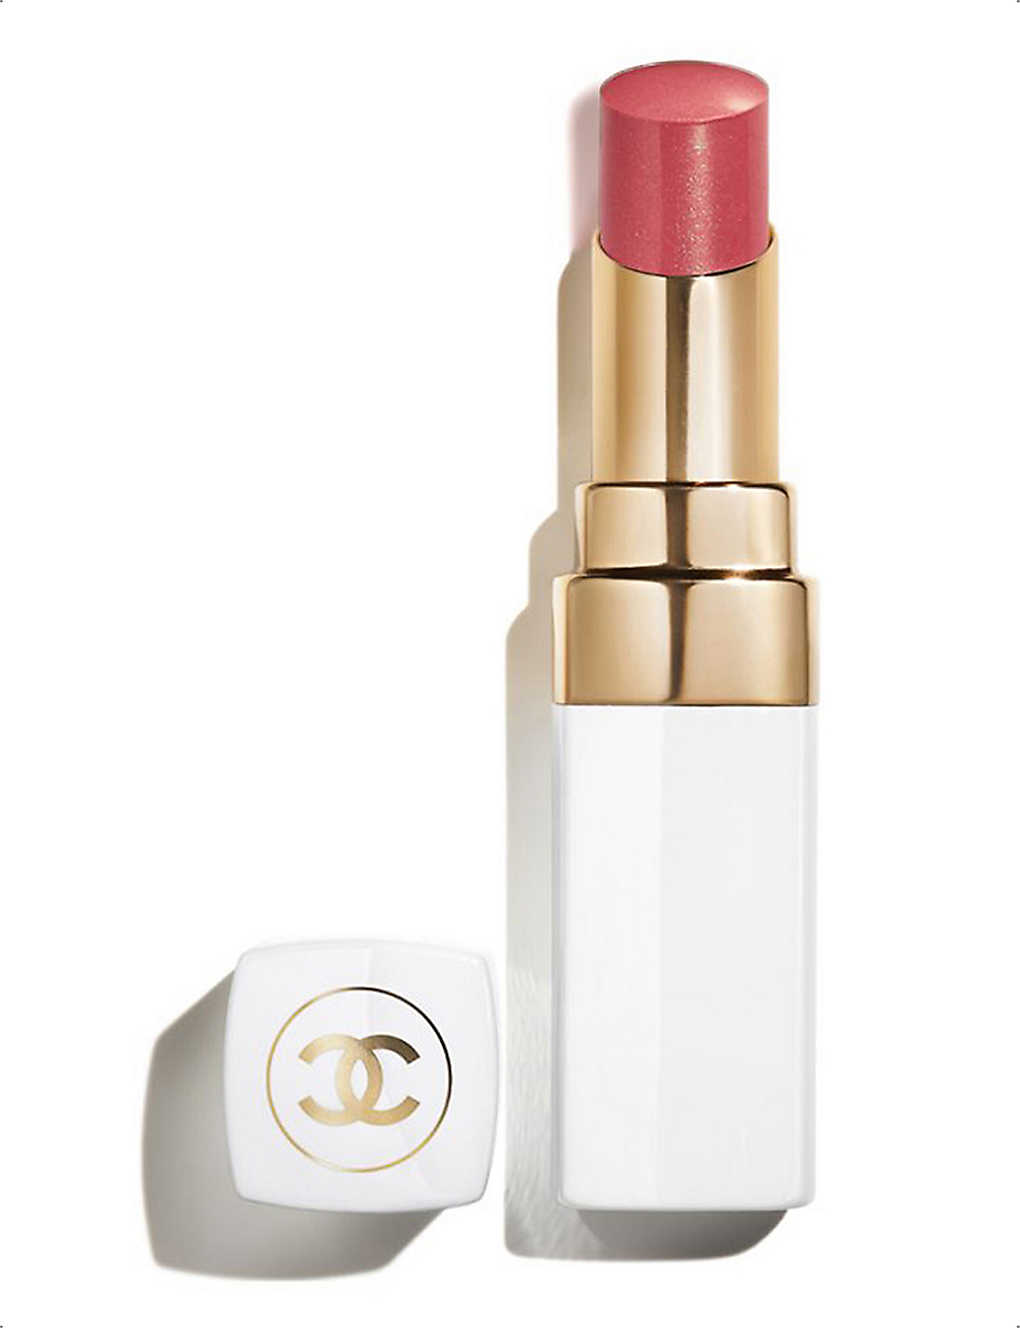 Chanel Flirty Coral 916 Rouge Coco Baume Hydrating Tinted Lip Balm 3g